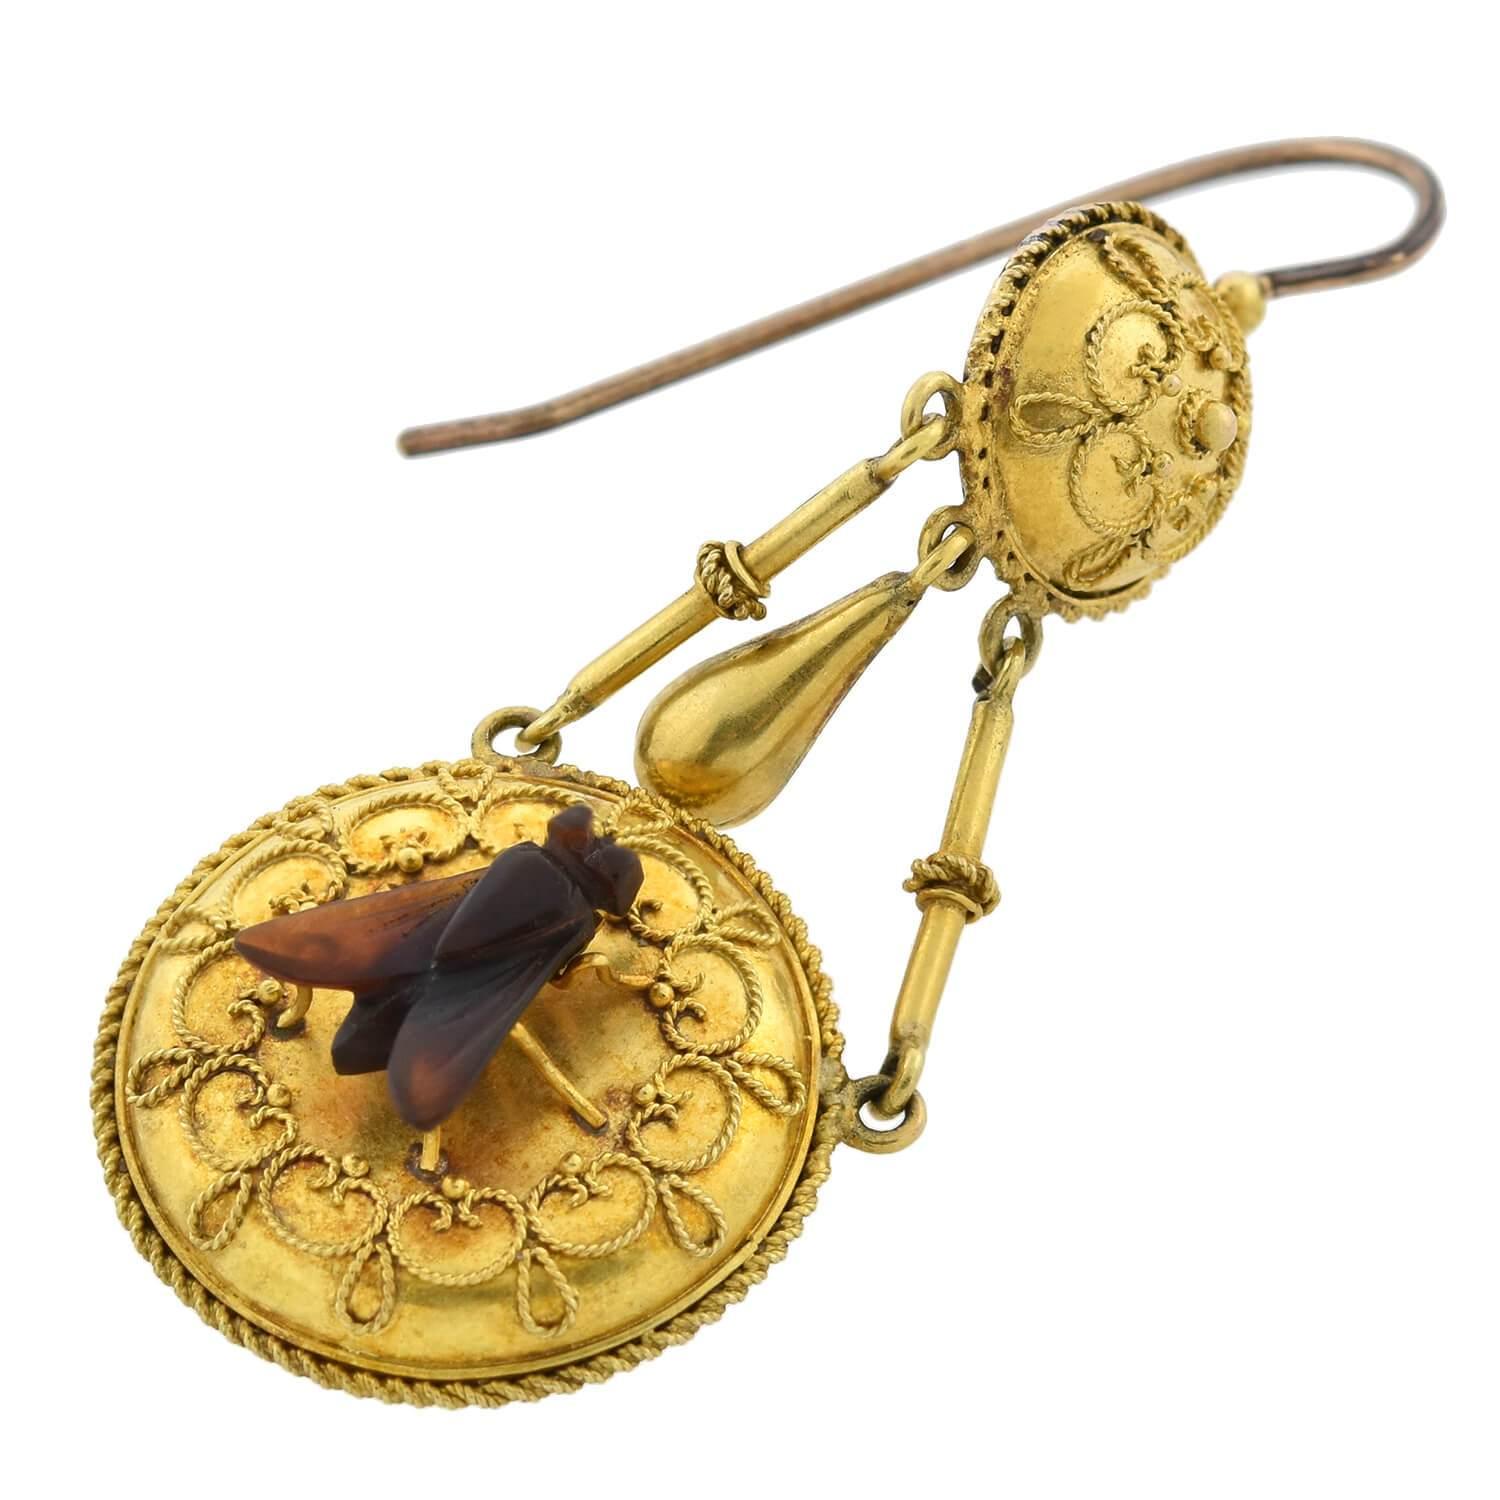 An unusual and exquisite pair of earrings from the Victorian (ca1880s) era! Crafted in blooming 18kt yellow gold, these superb earrings begin with a simple earring wire above a round topper. The surmount is slightly convex and ornately adorned with